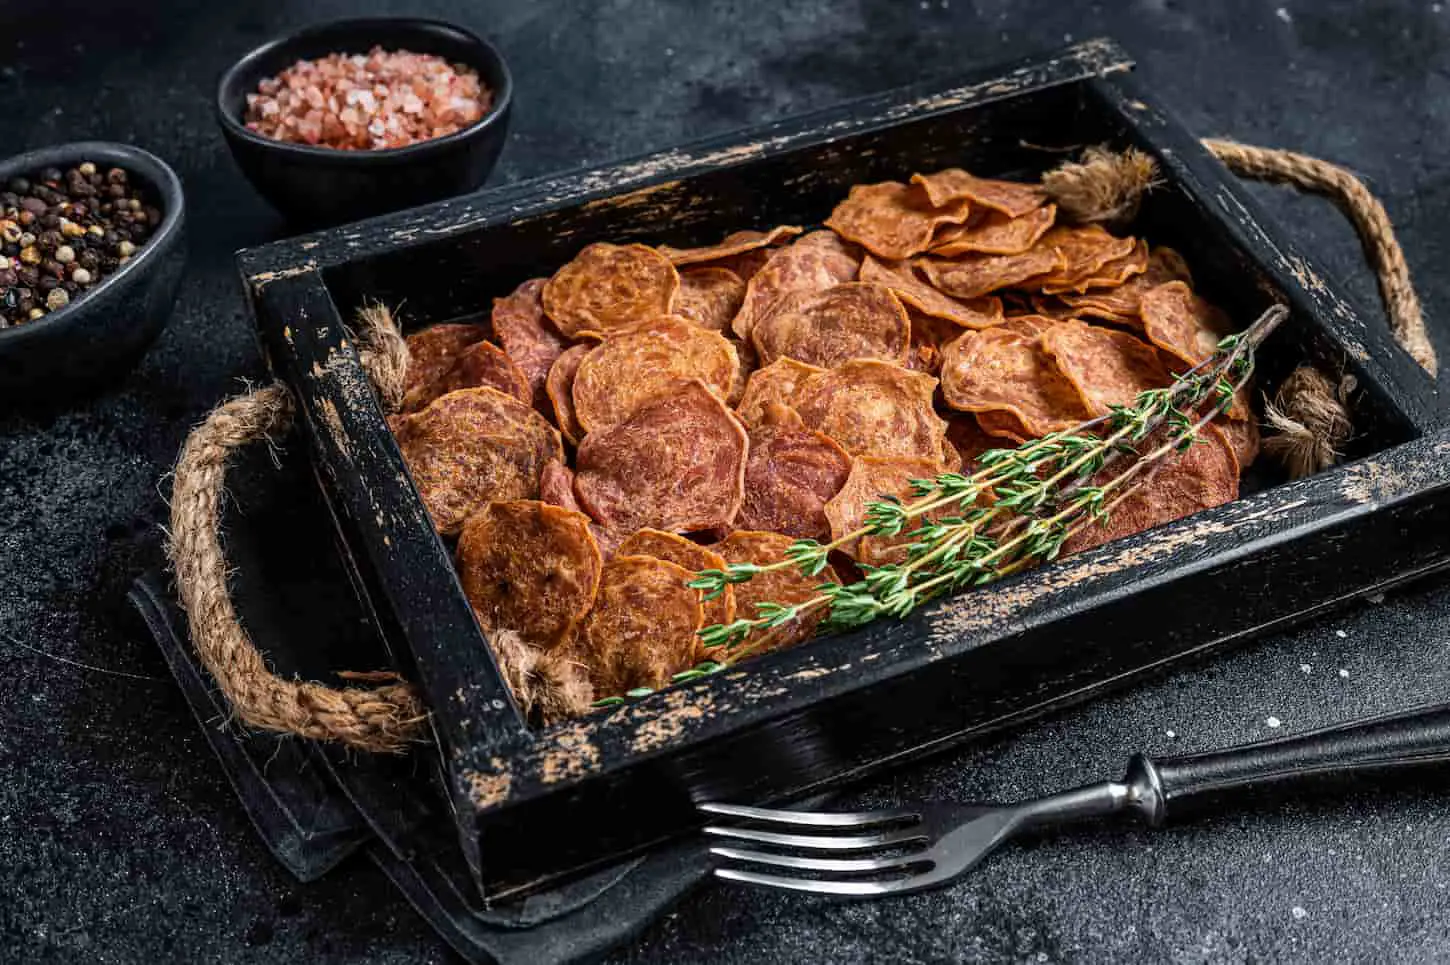 An image of Cured Beef and pork Jerky meat in a wooden tray on a black background.